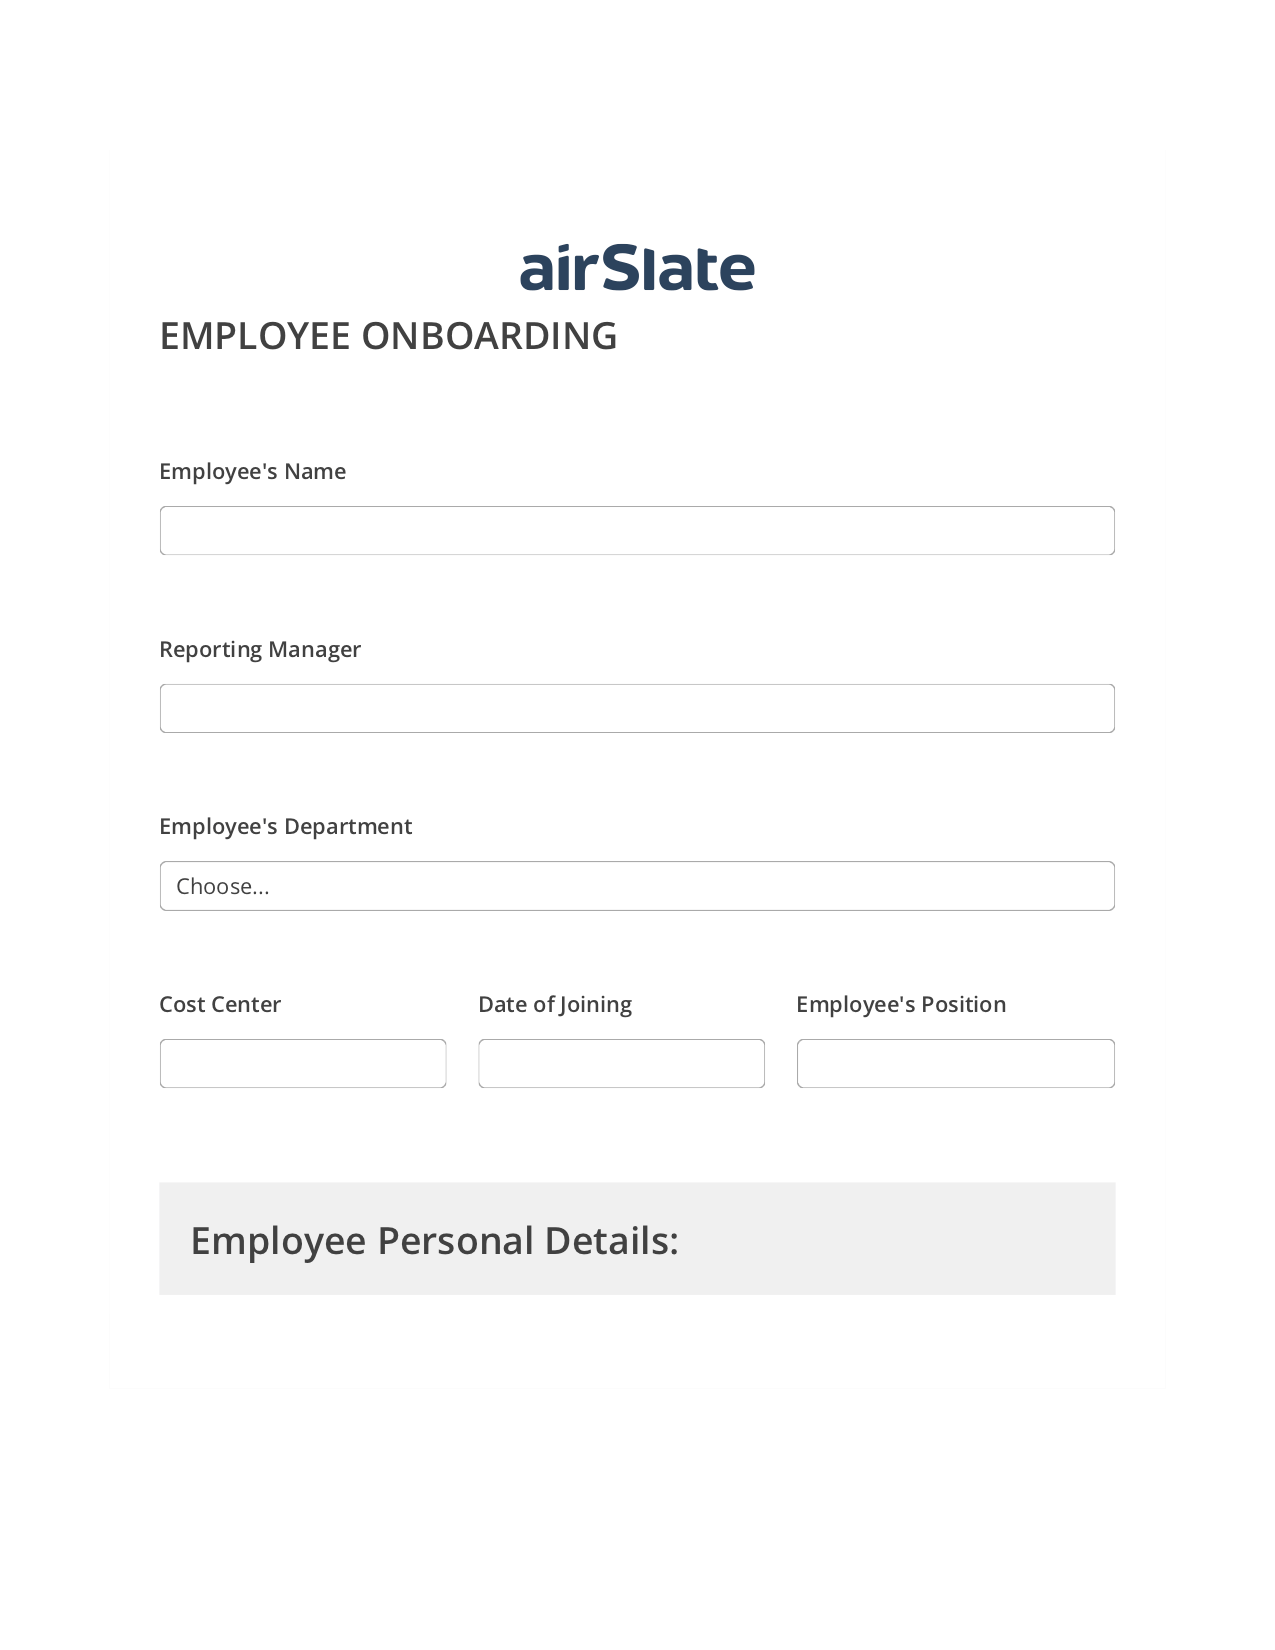 Employee Onboarding Workflow Pre-fill from Salesforce Record Bot, Create NetSuite Record bot, Export to Smartsheet